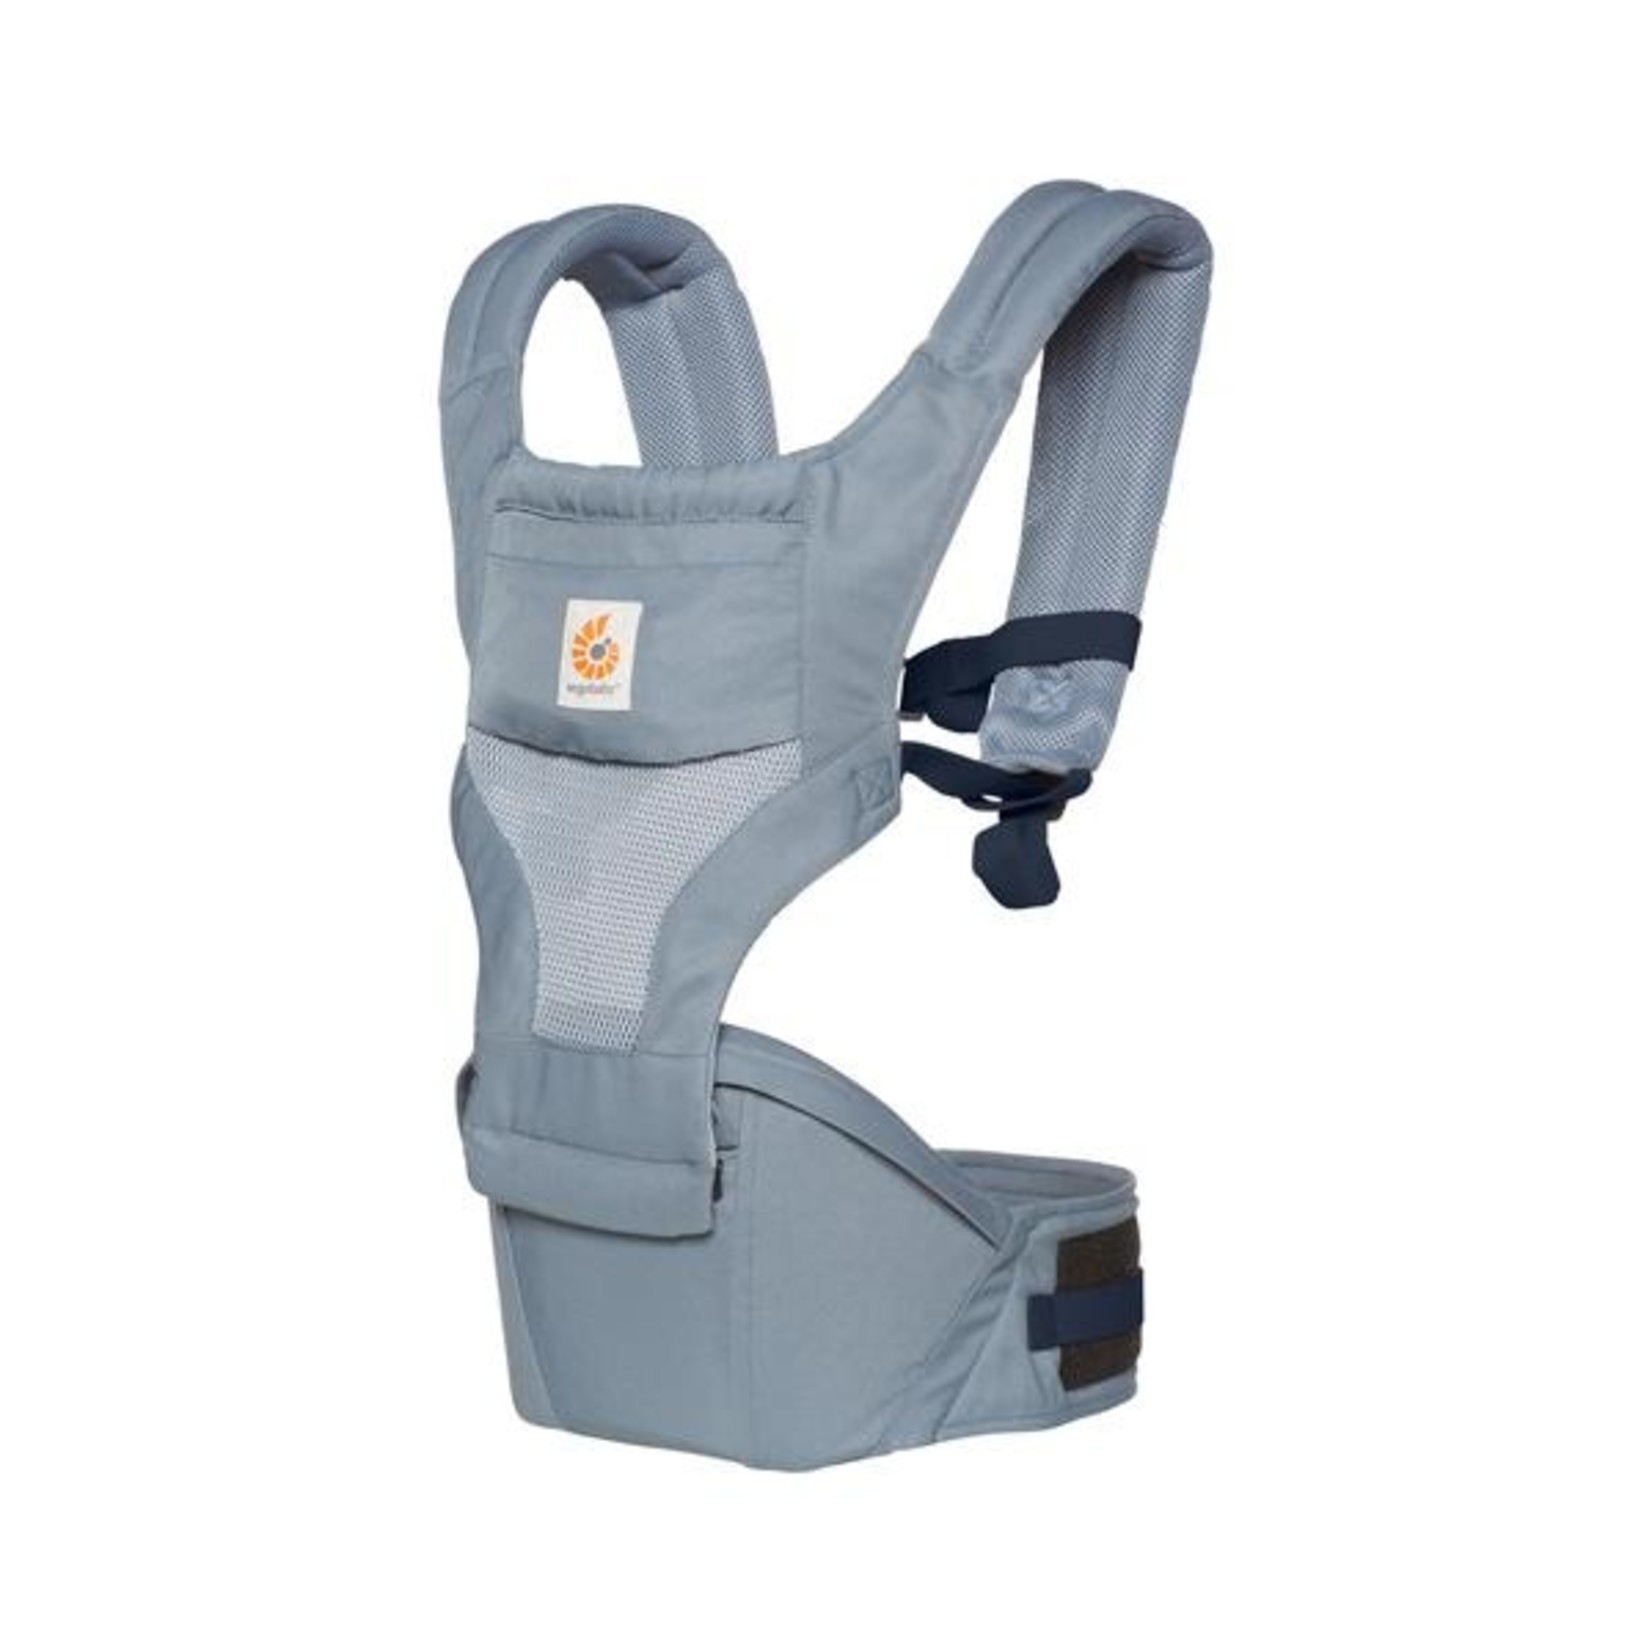 ERGOBABY HIP SEAT COOL AIR MESH BABY CARRIER - OXFORD BLUE